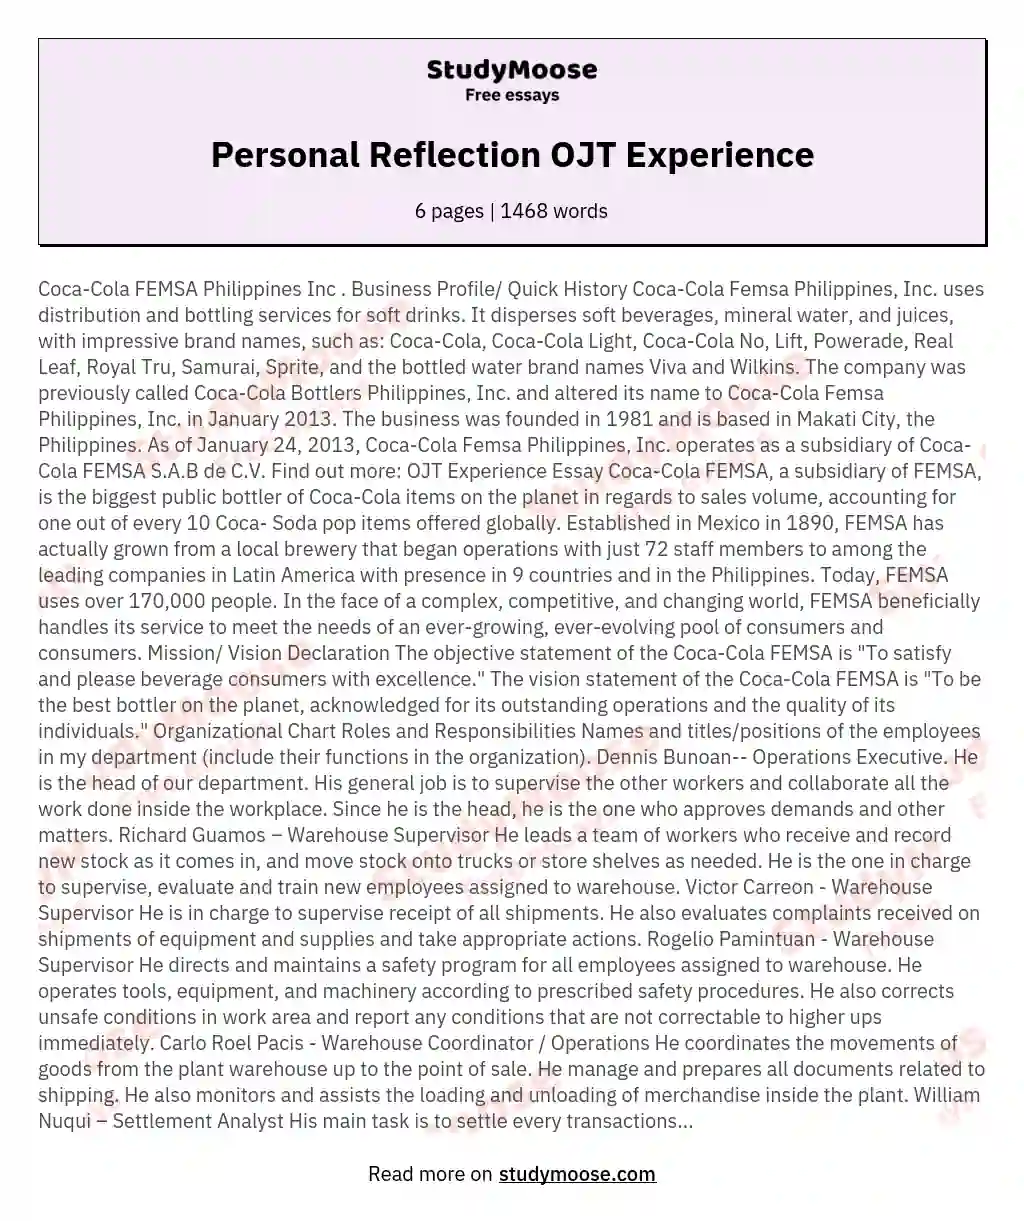 Personal Reflection OJT Experience essay